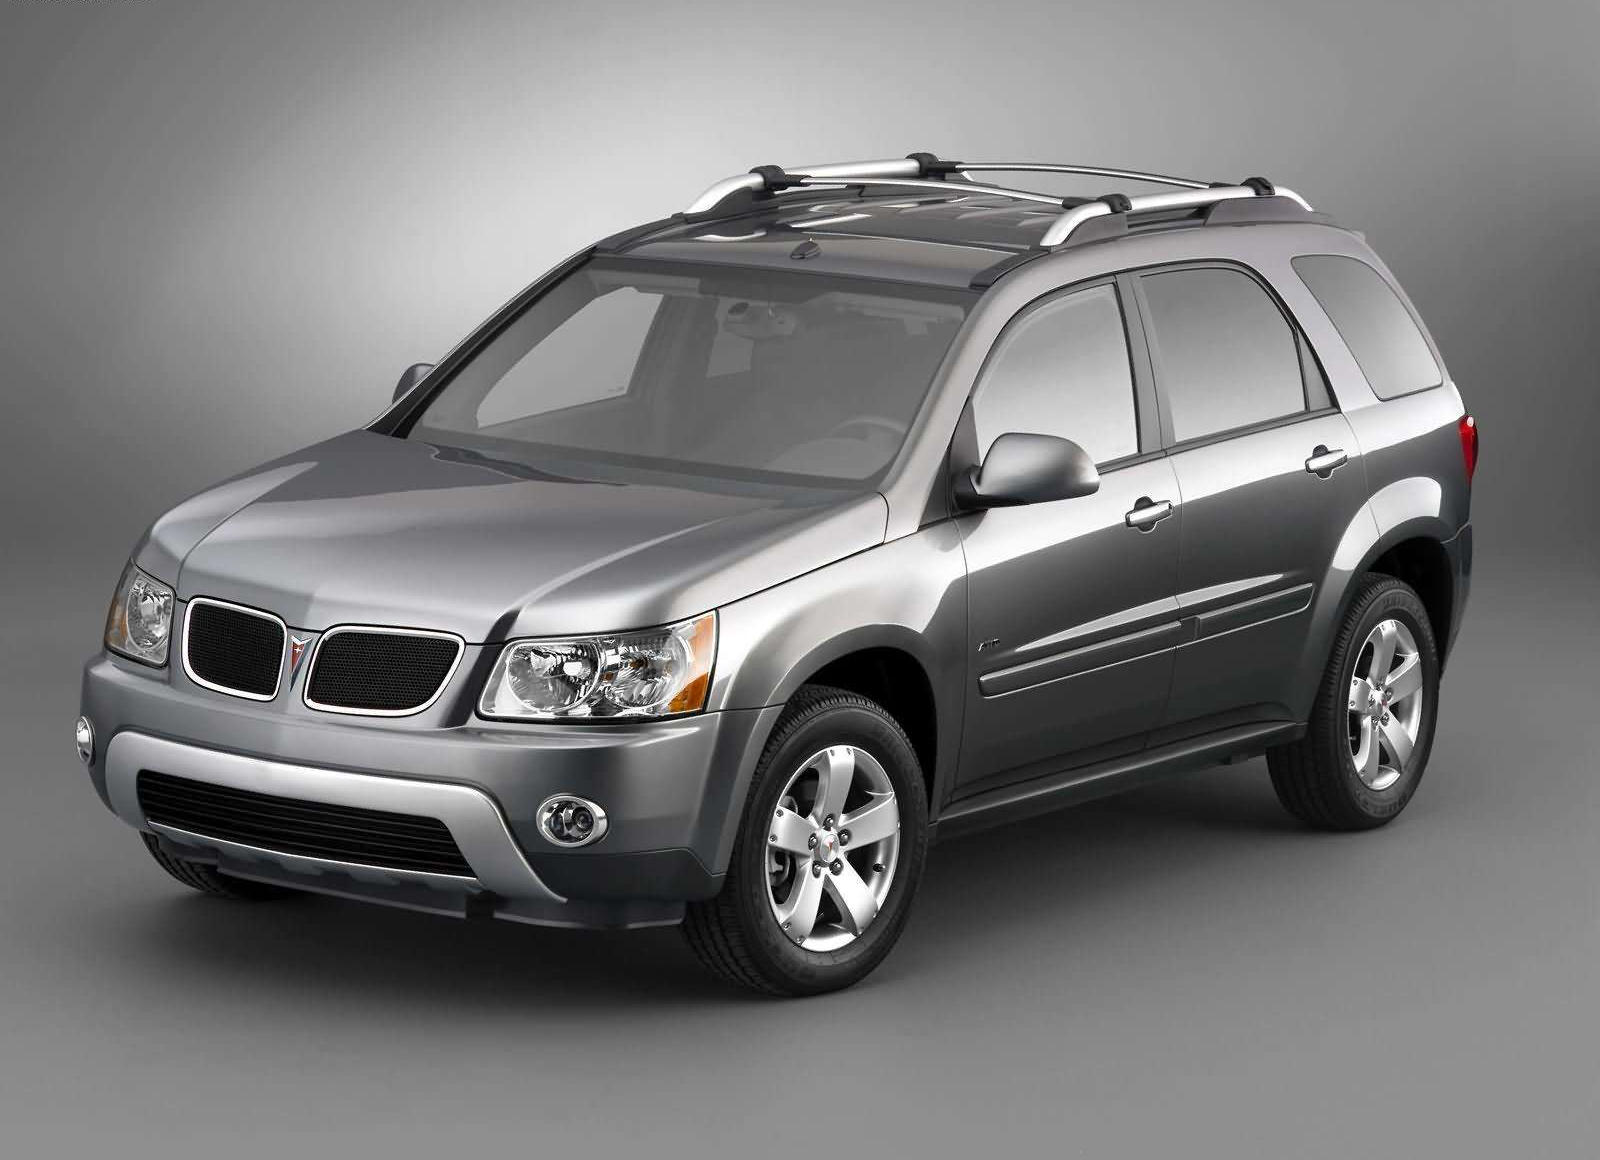 2009 Pontiac Torrent Front Angle View